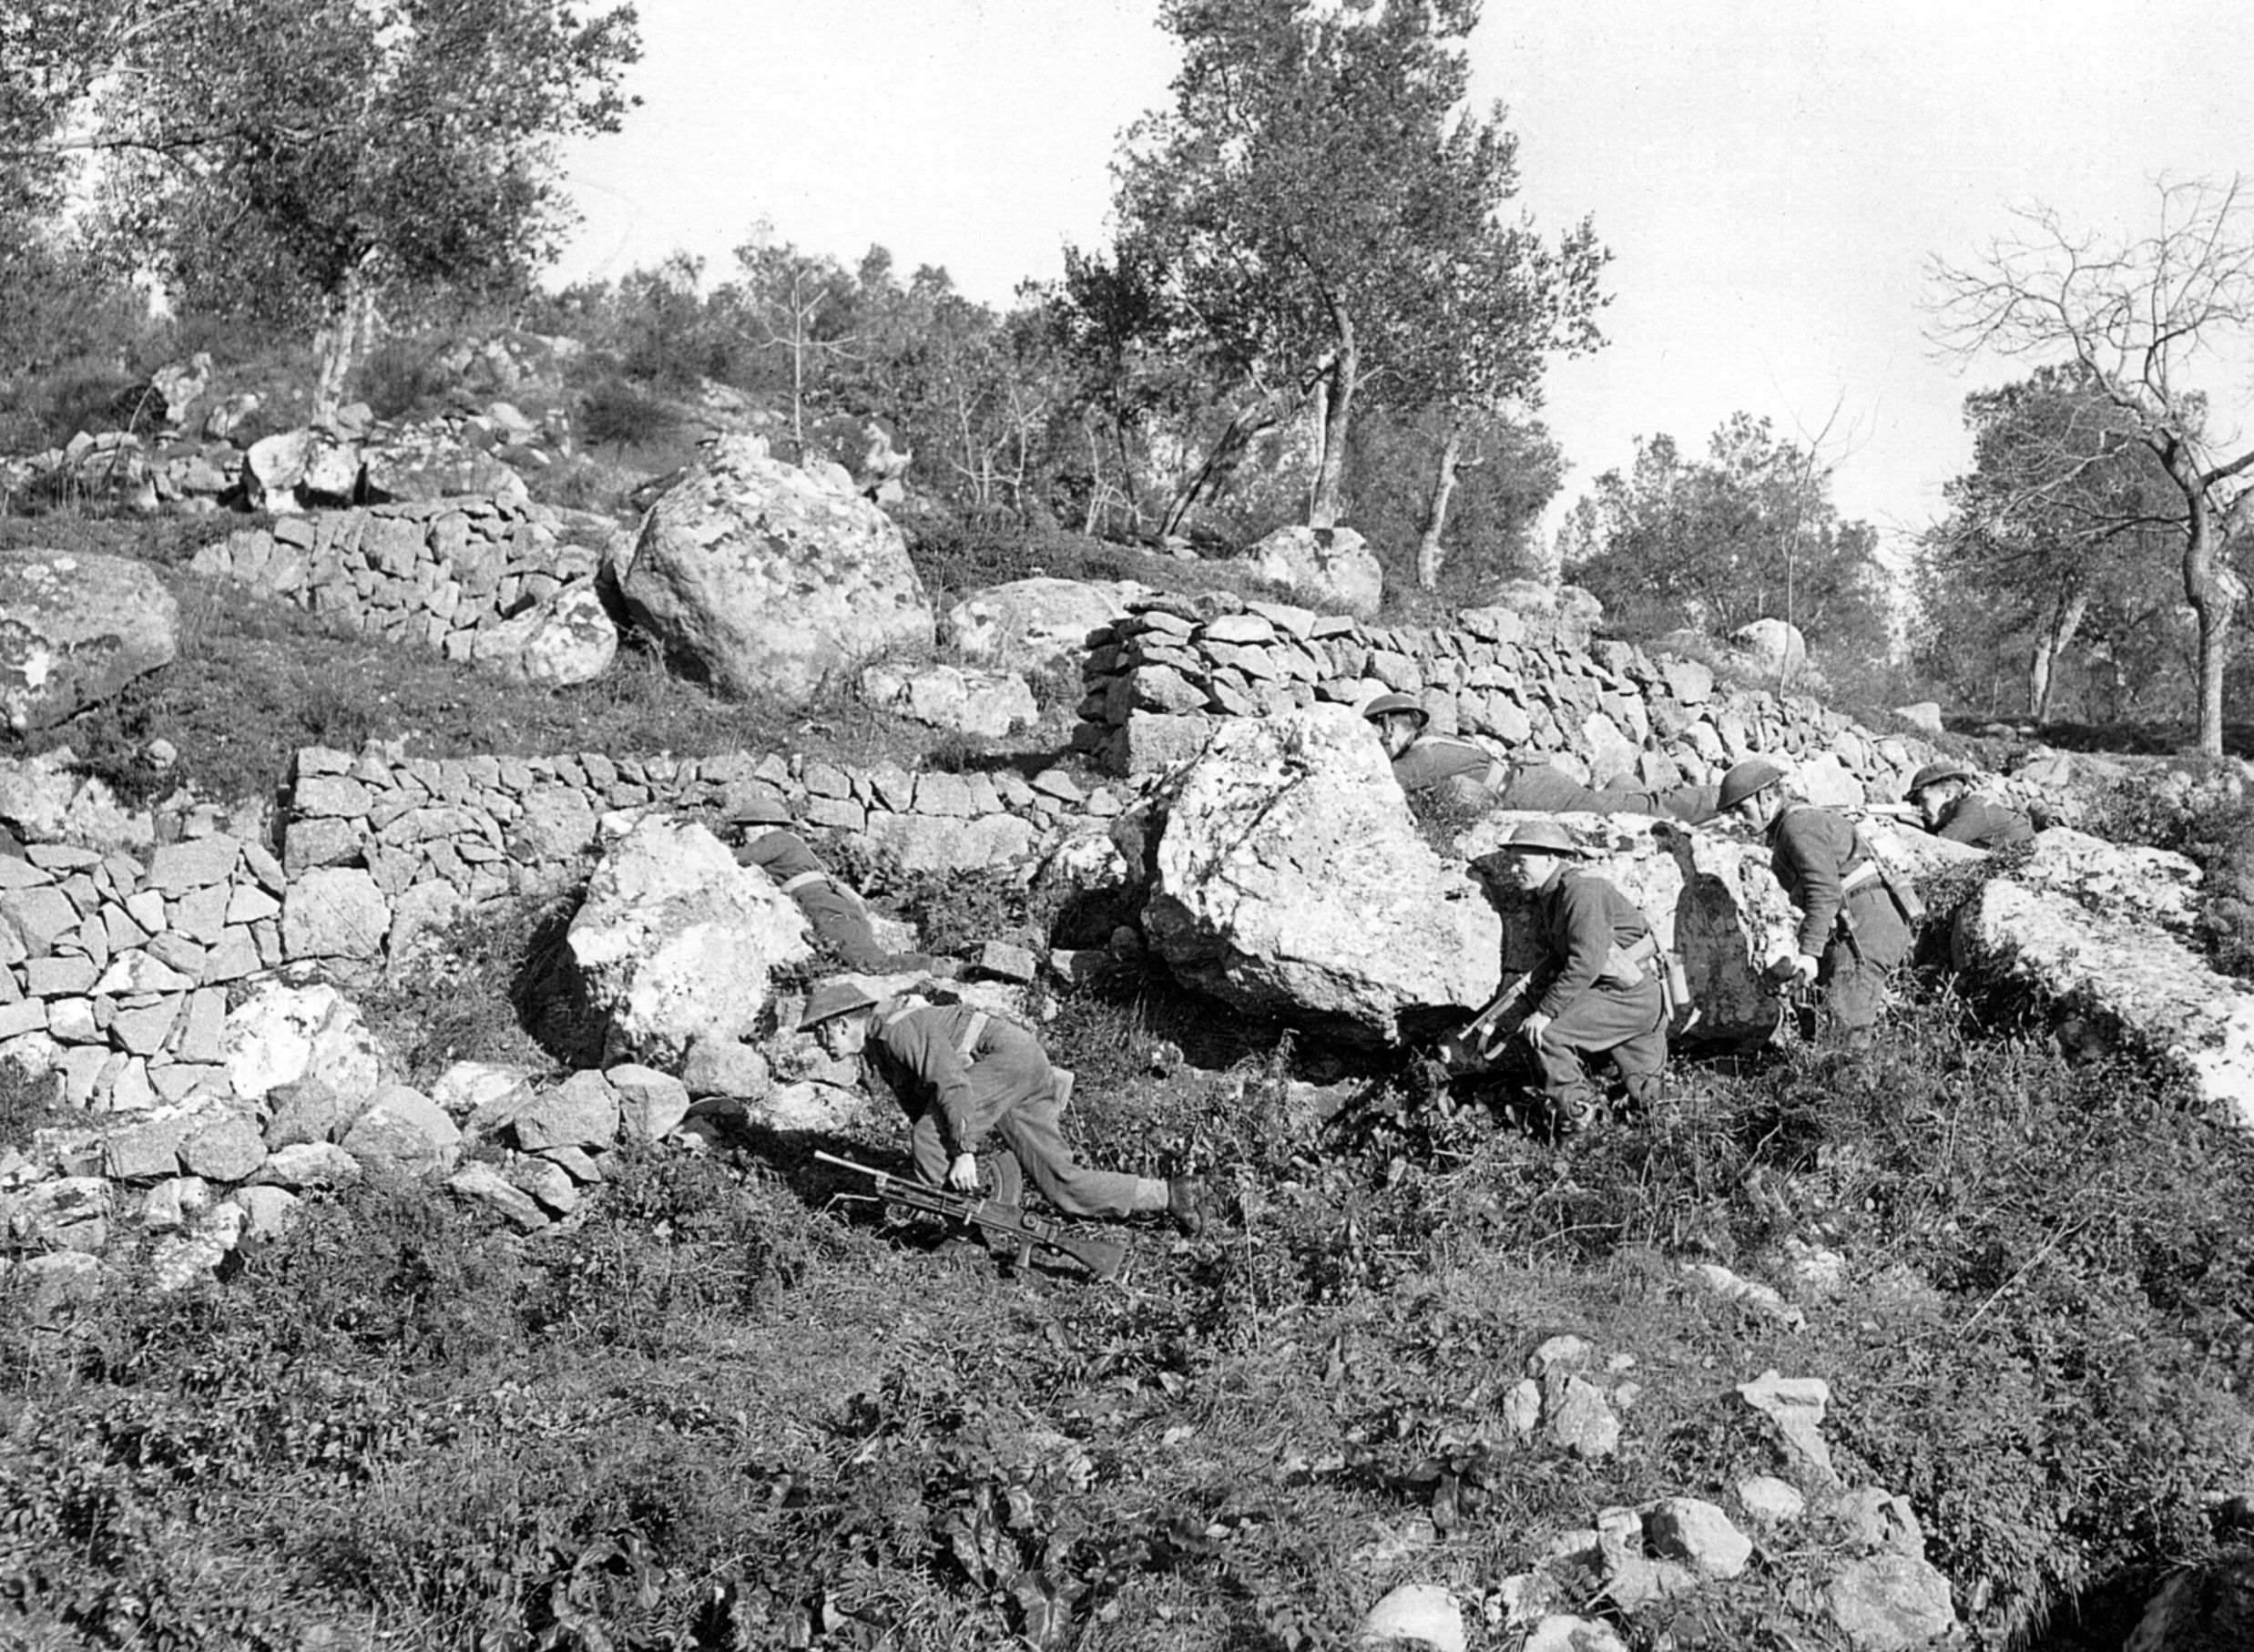 Carrying their standard-issue Bren guns, British soldiers use the cover of a stone wall to advance against German positions near the town of Cassino. The Allies eventually attempted four times to take the ruins of the Benedictine abbey above the town.